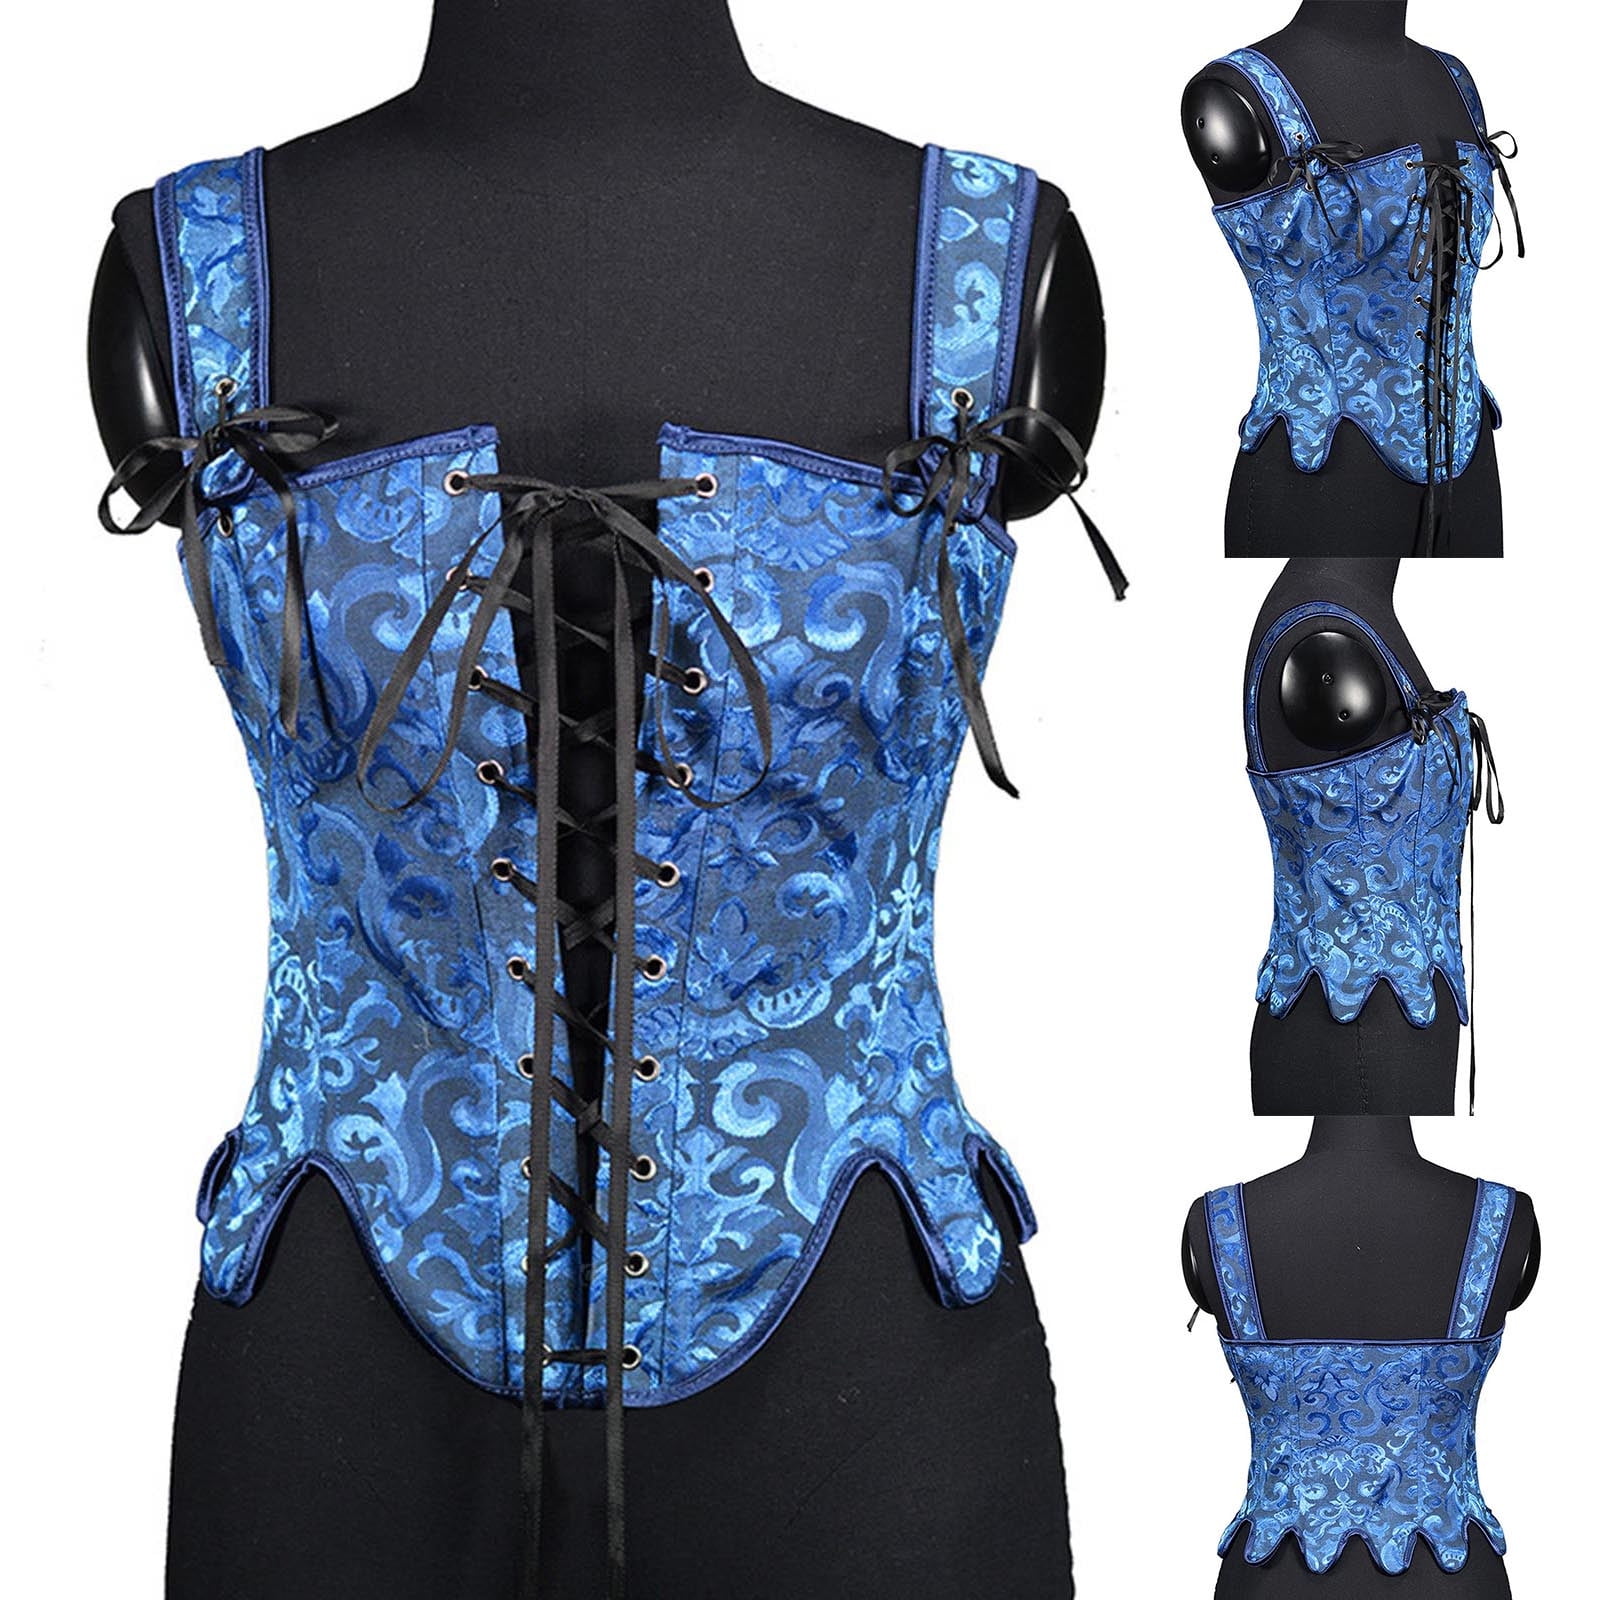 Bustiers & Corsets, Women's Tops, Shirts, Bodysuits & More